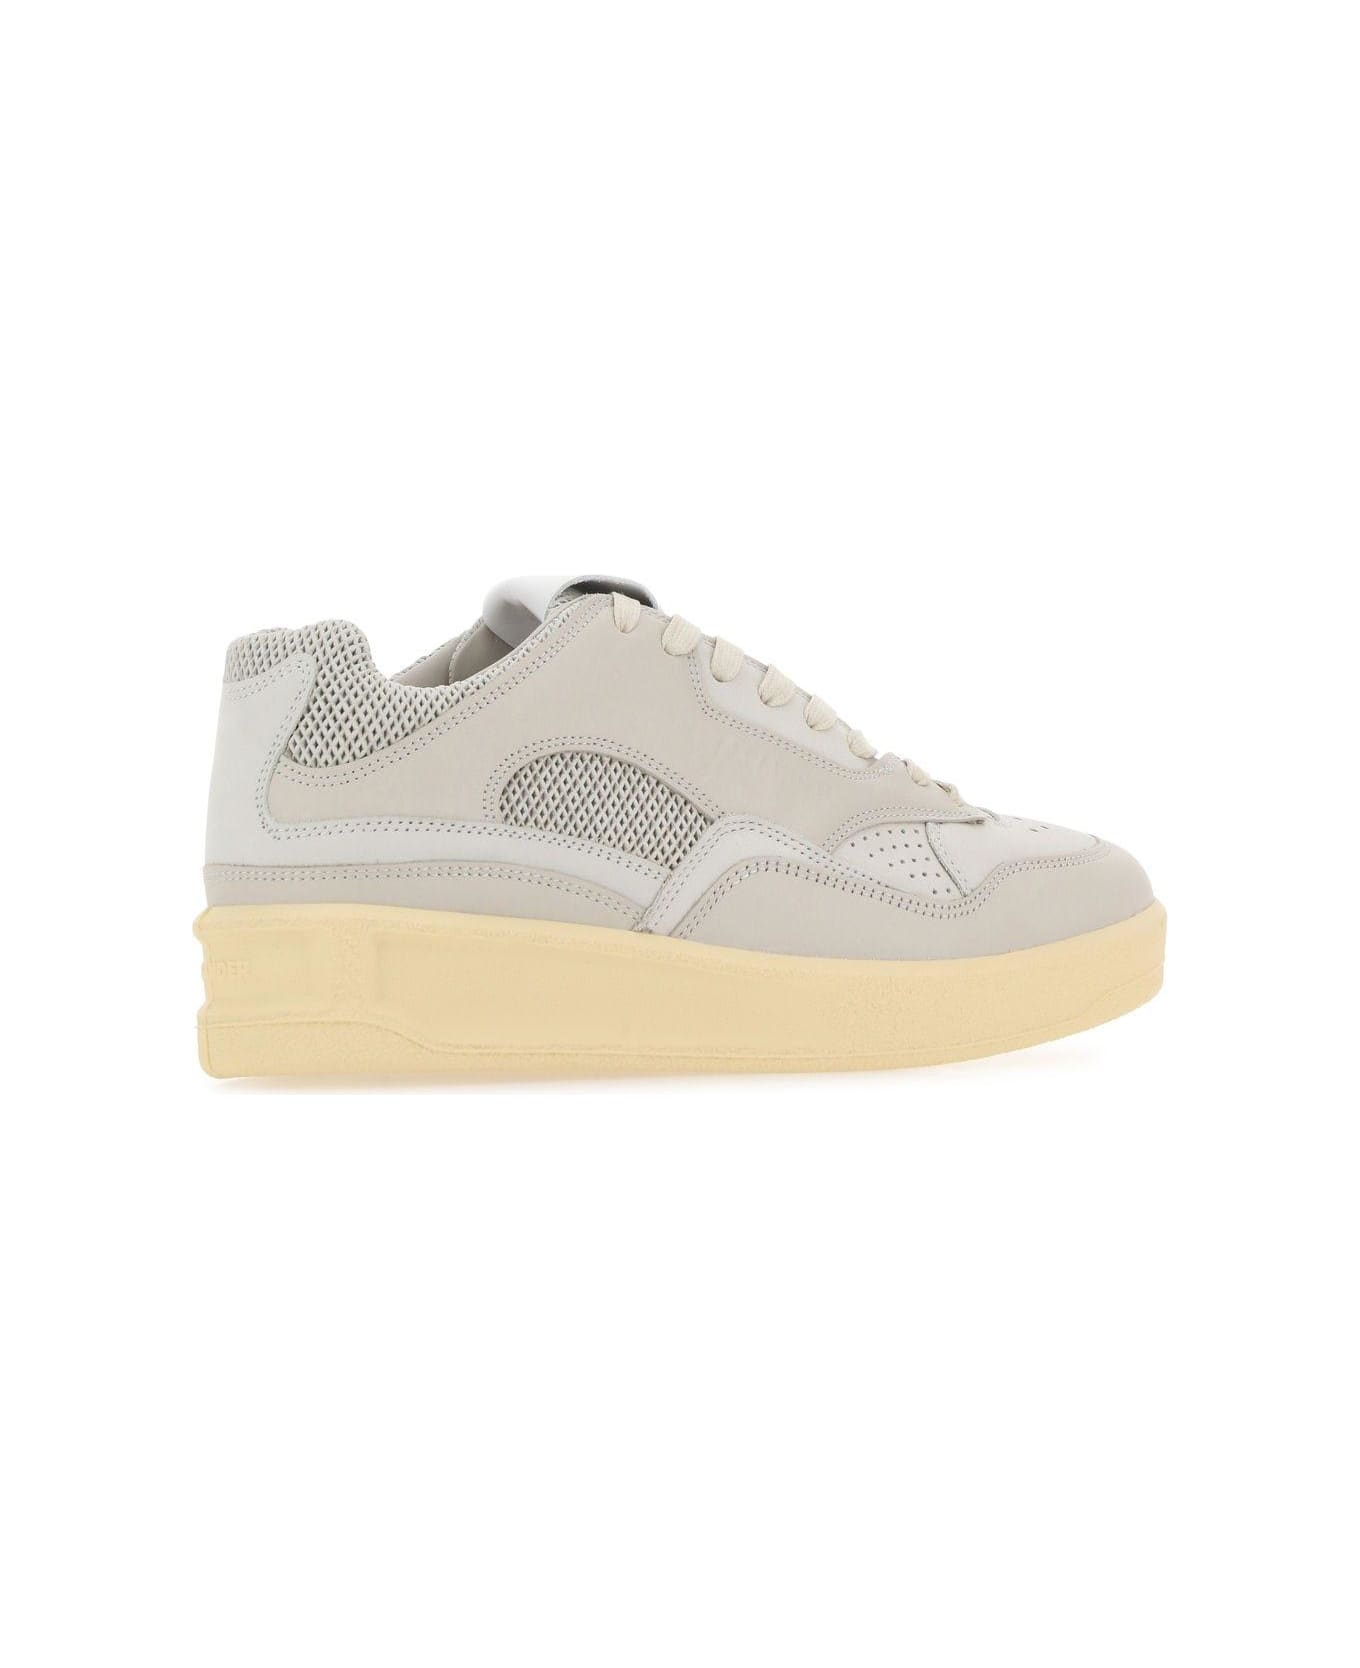 Jil Sander Grey Canvas And Rubber Sneakers - GREY